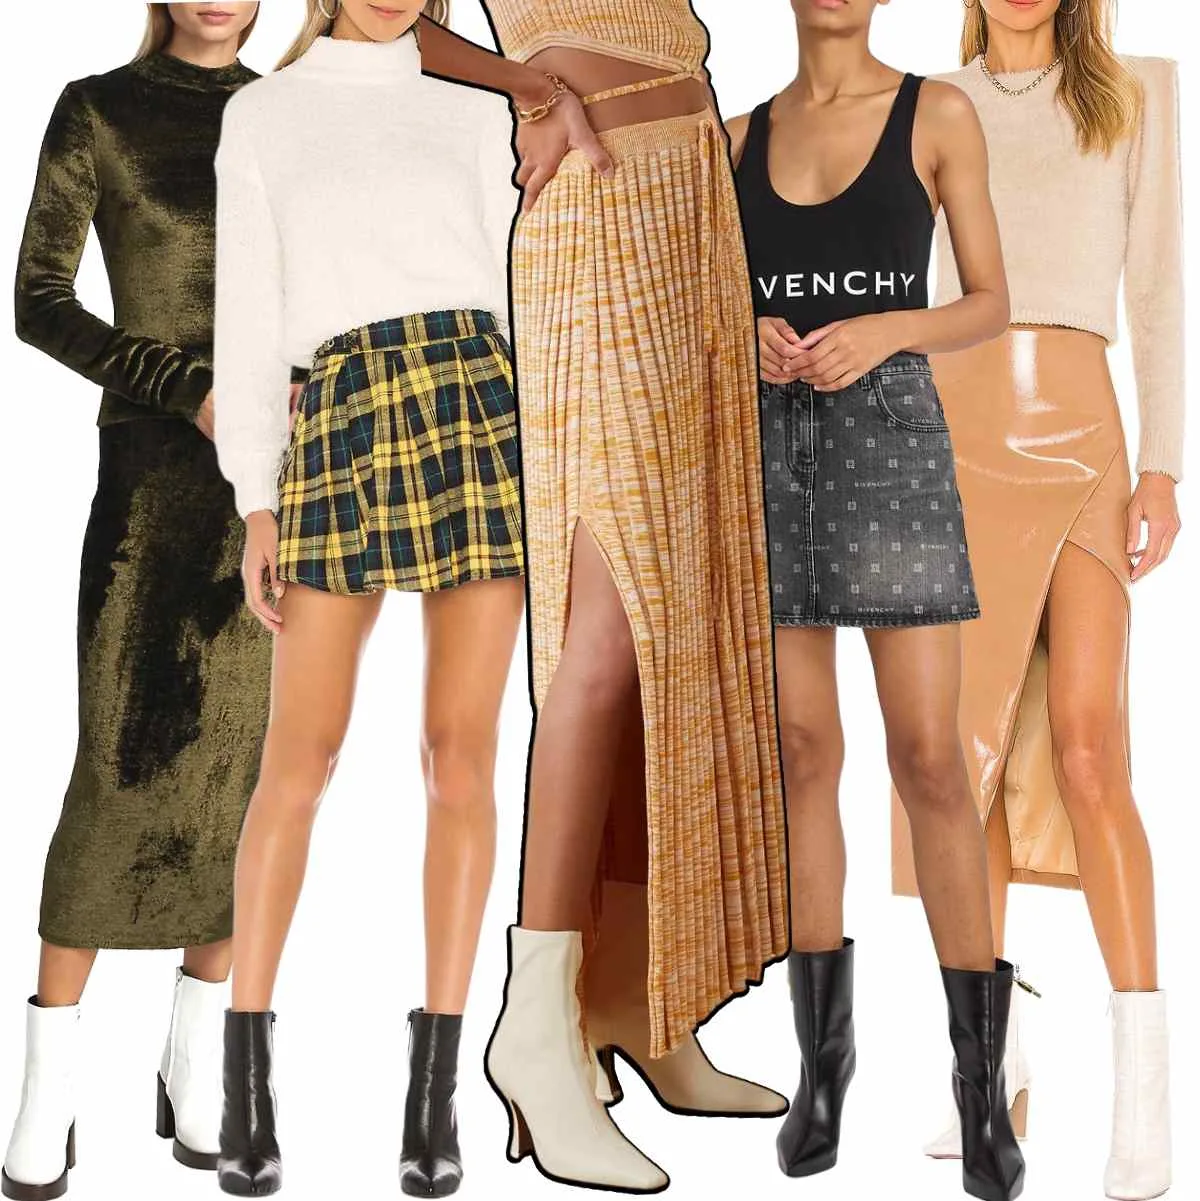 Collage of 5 women wearing different skirt outfits with ankle boots.